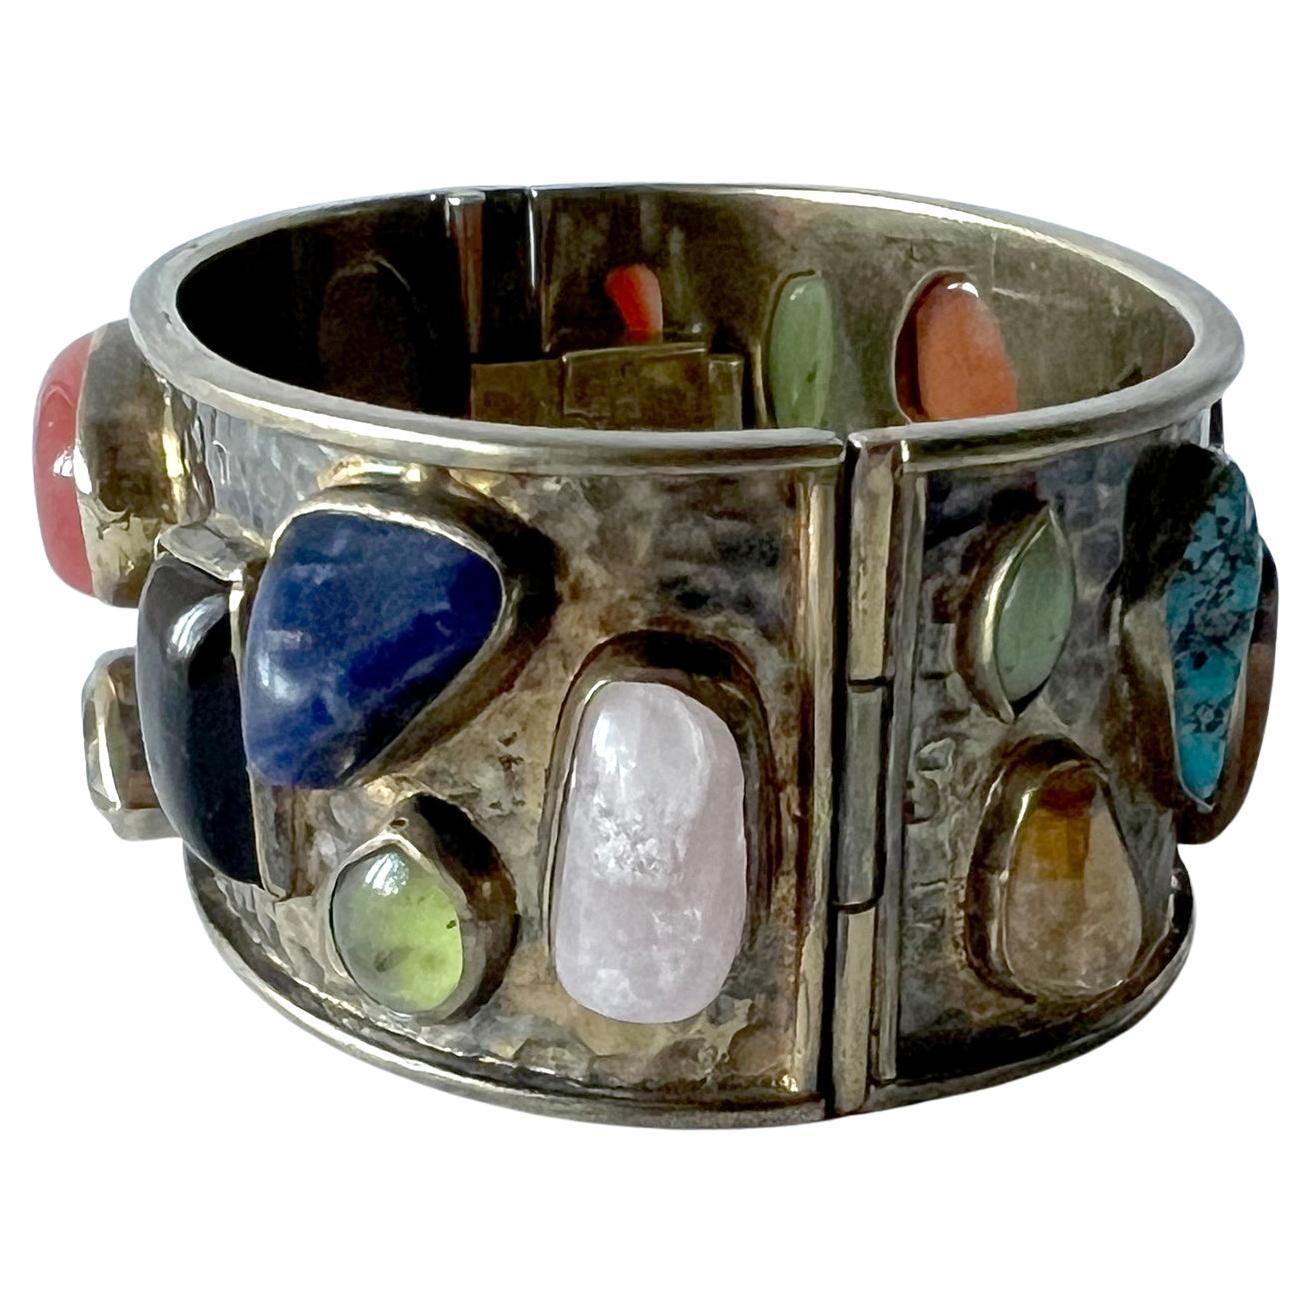 Multi colored semi-precious gemstones of turquoise, opal, amethyst, carnelian and others, set in a sterling silver hinged cuff and created by Celia Harms of Mexico.  Each stone is bezel set within a hand hammered silver, gold washed bracelet. 